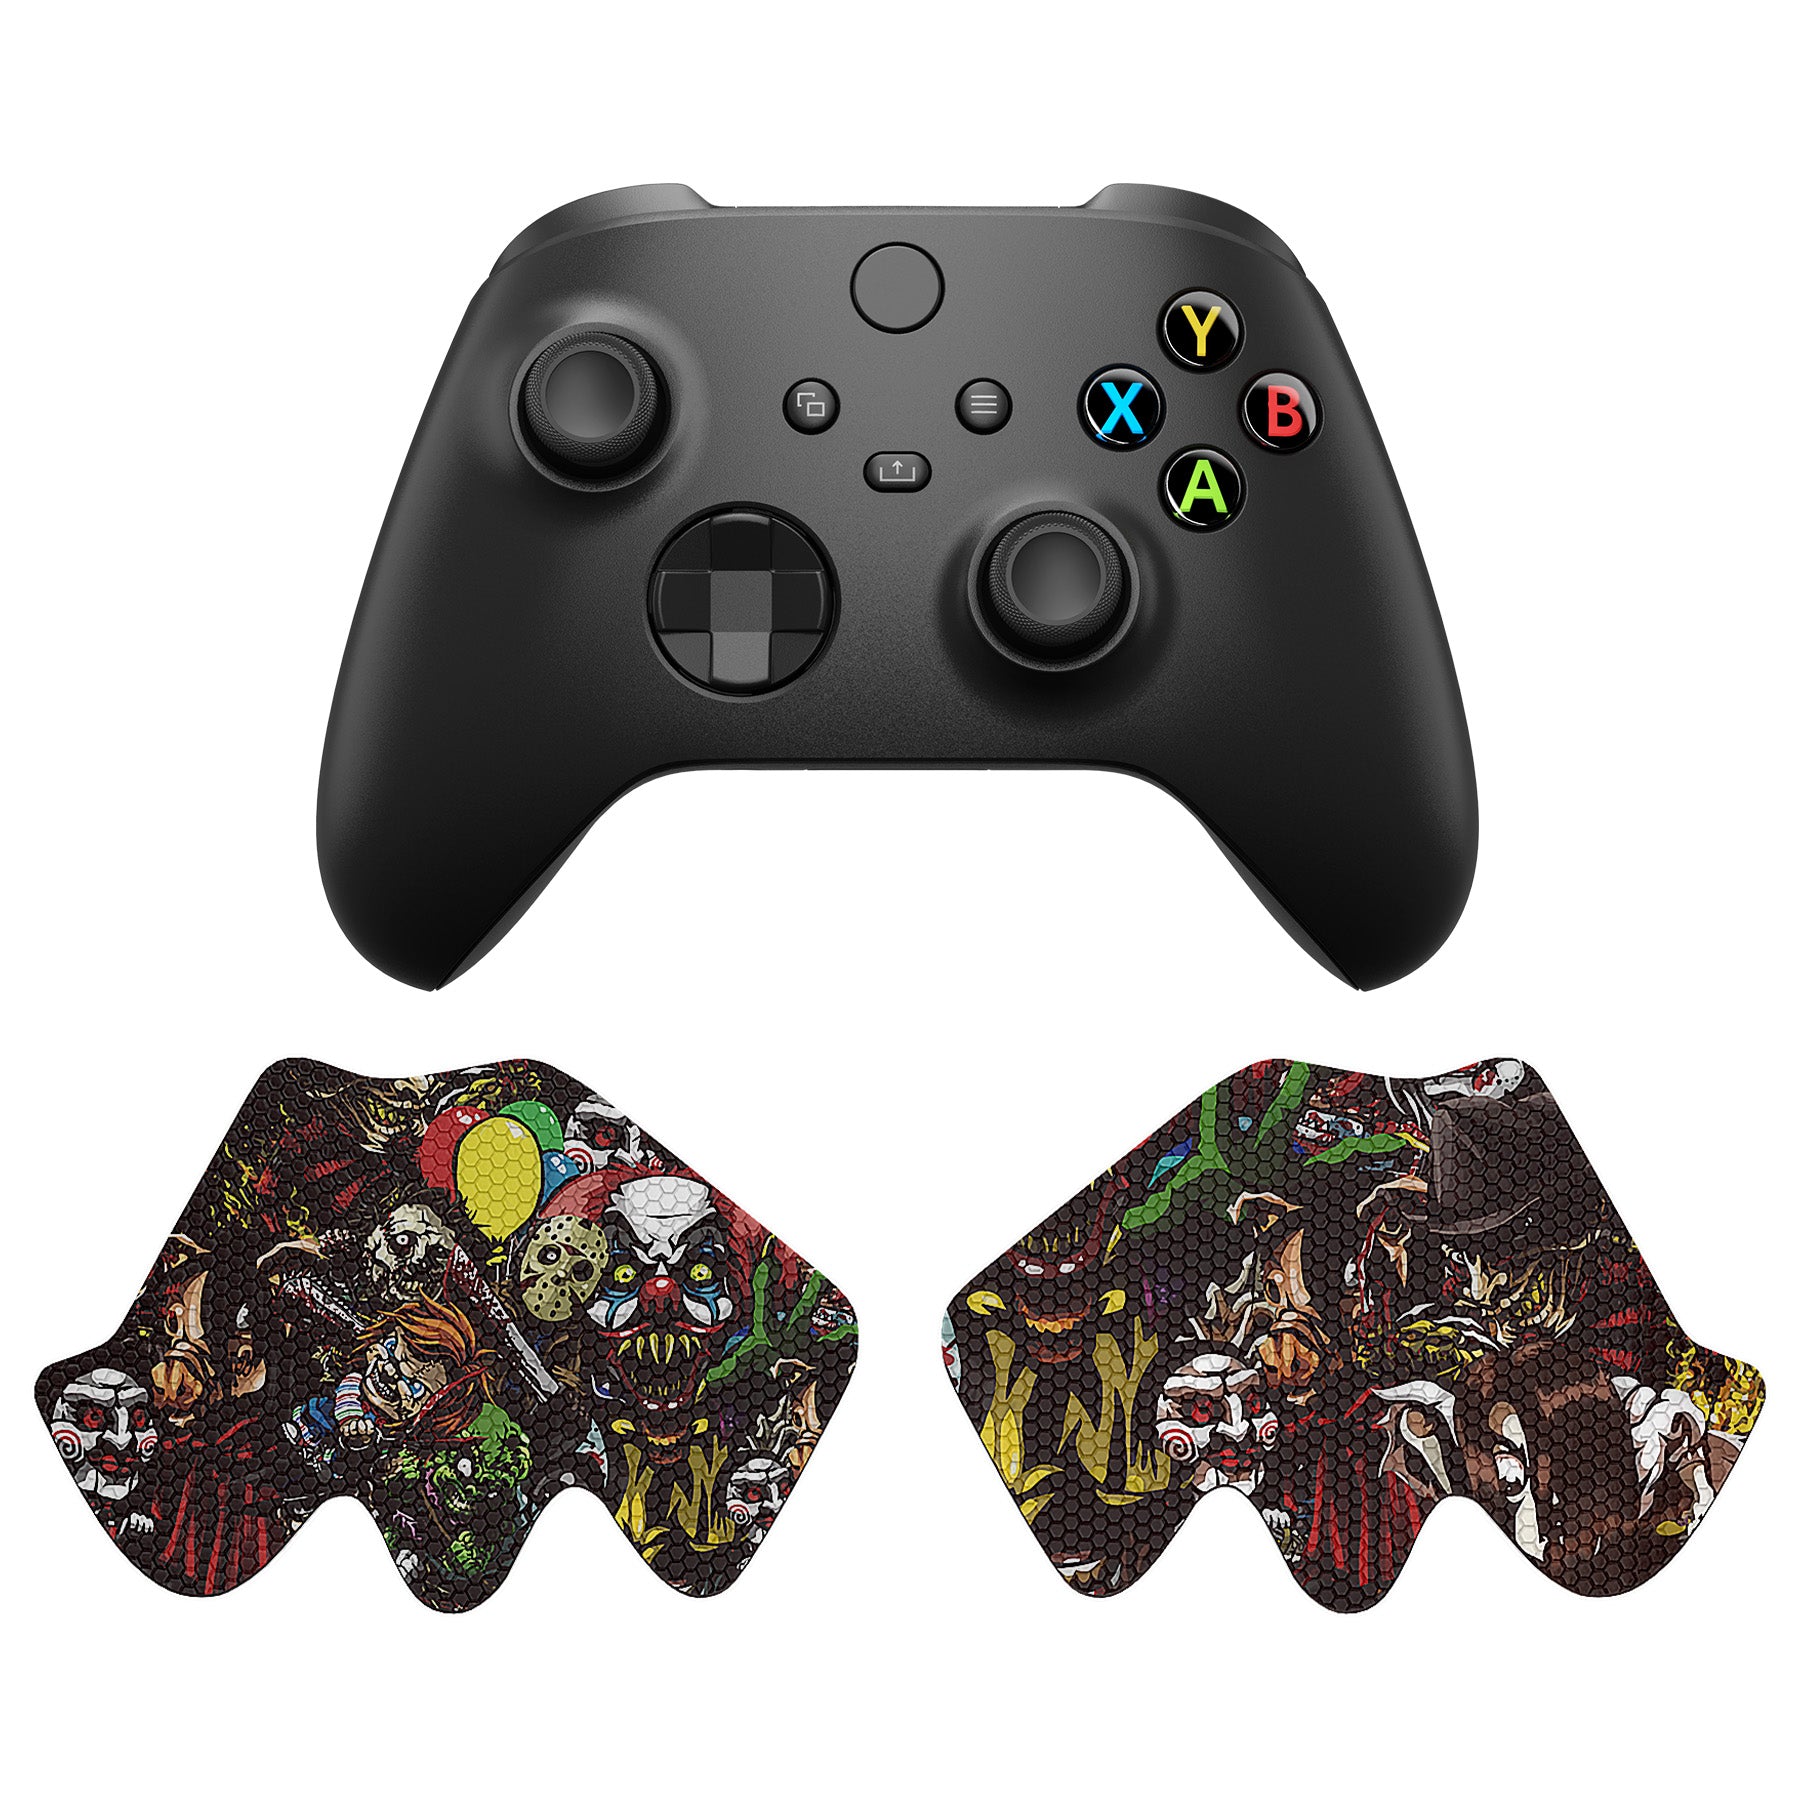 PlayVital Scary Party Anti-Skid Sweat-Absorbent Controller Grip for Xbox Series X/S Controller, Professional Textured Soft Rubber Pads Handle Grips for Xbox Series X/S Controller - X3PJ041 PlayVital